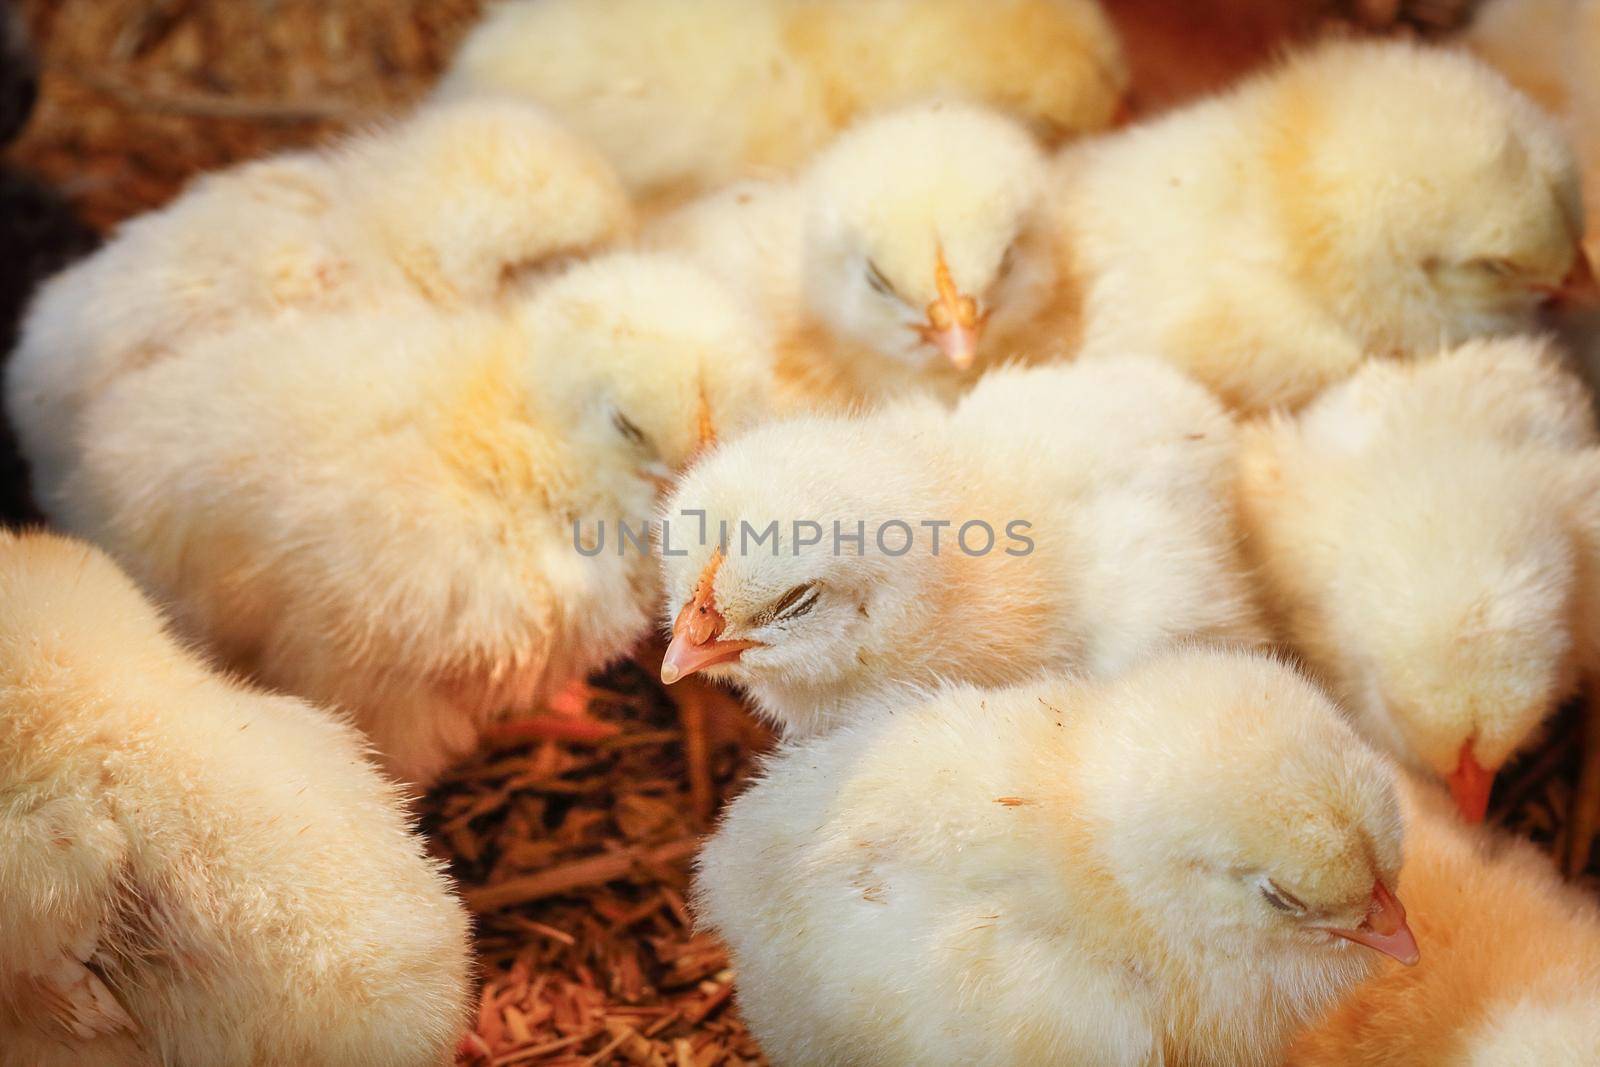 Baby chicken in poultry farm